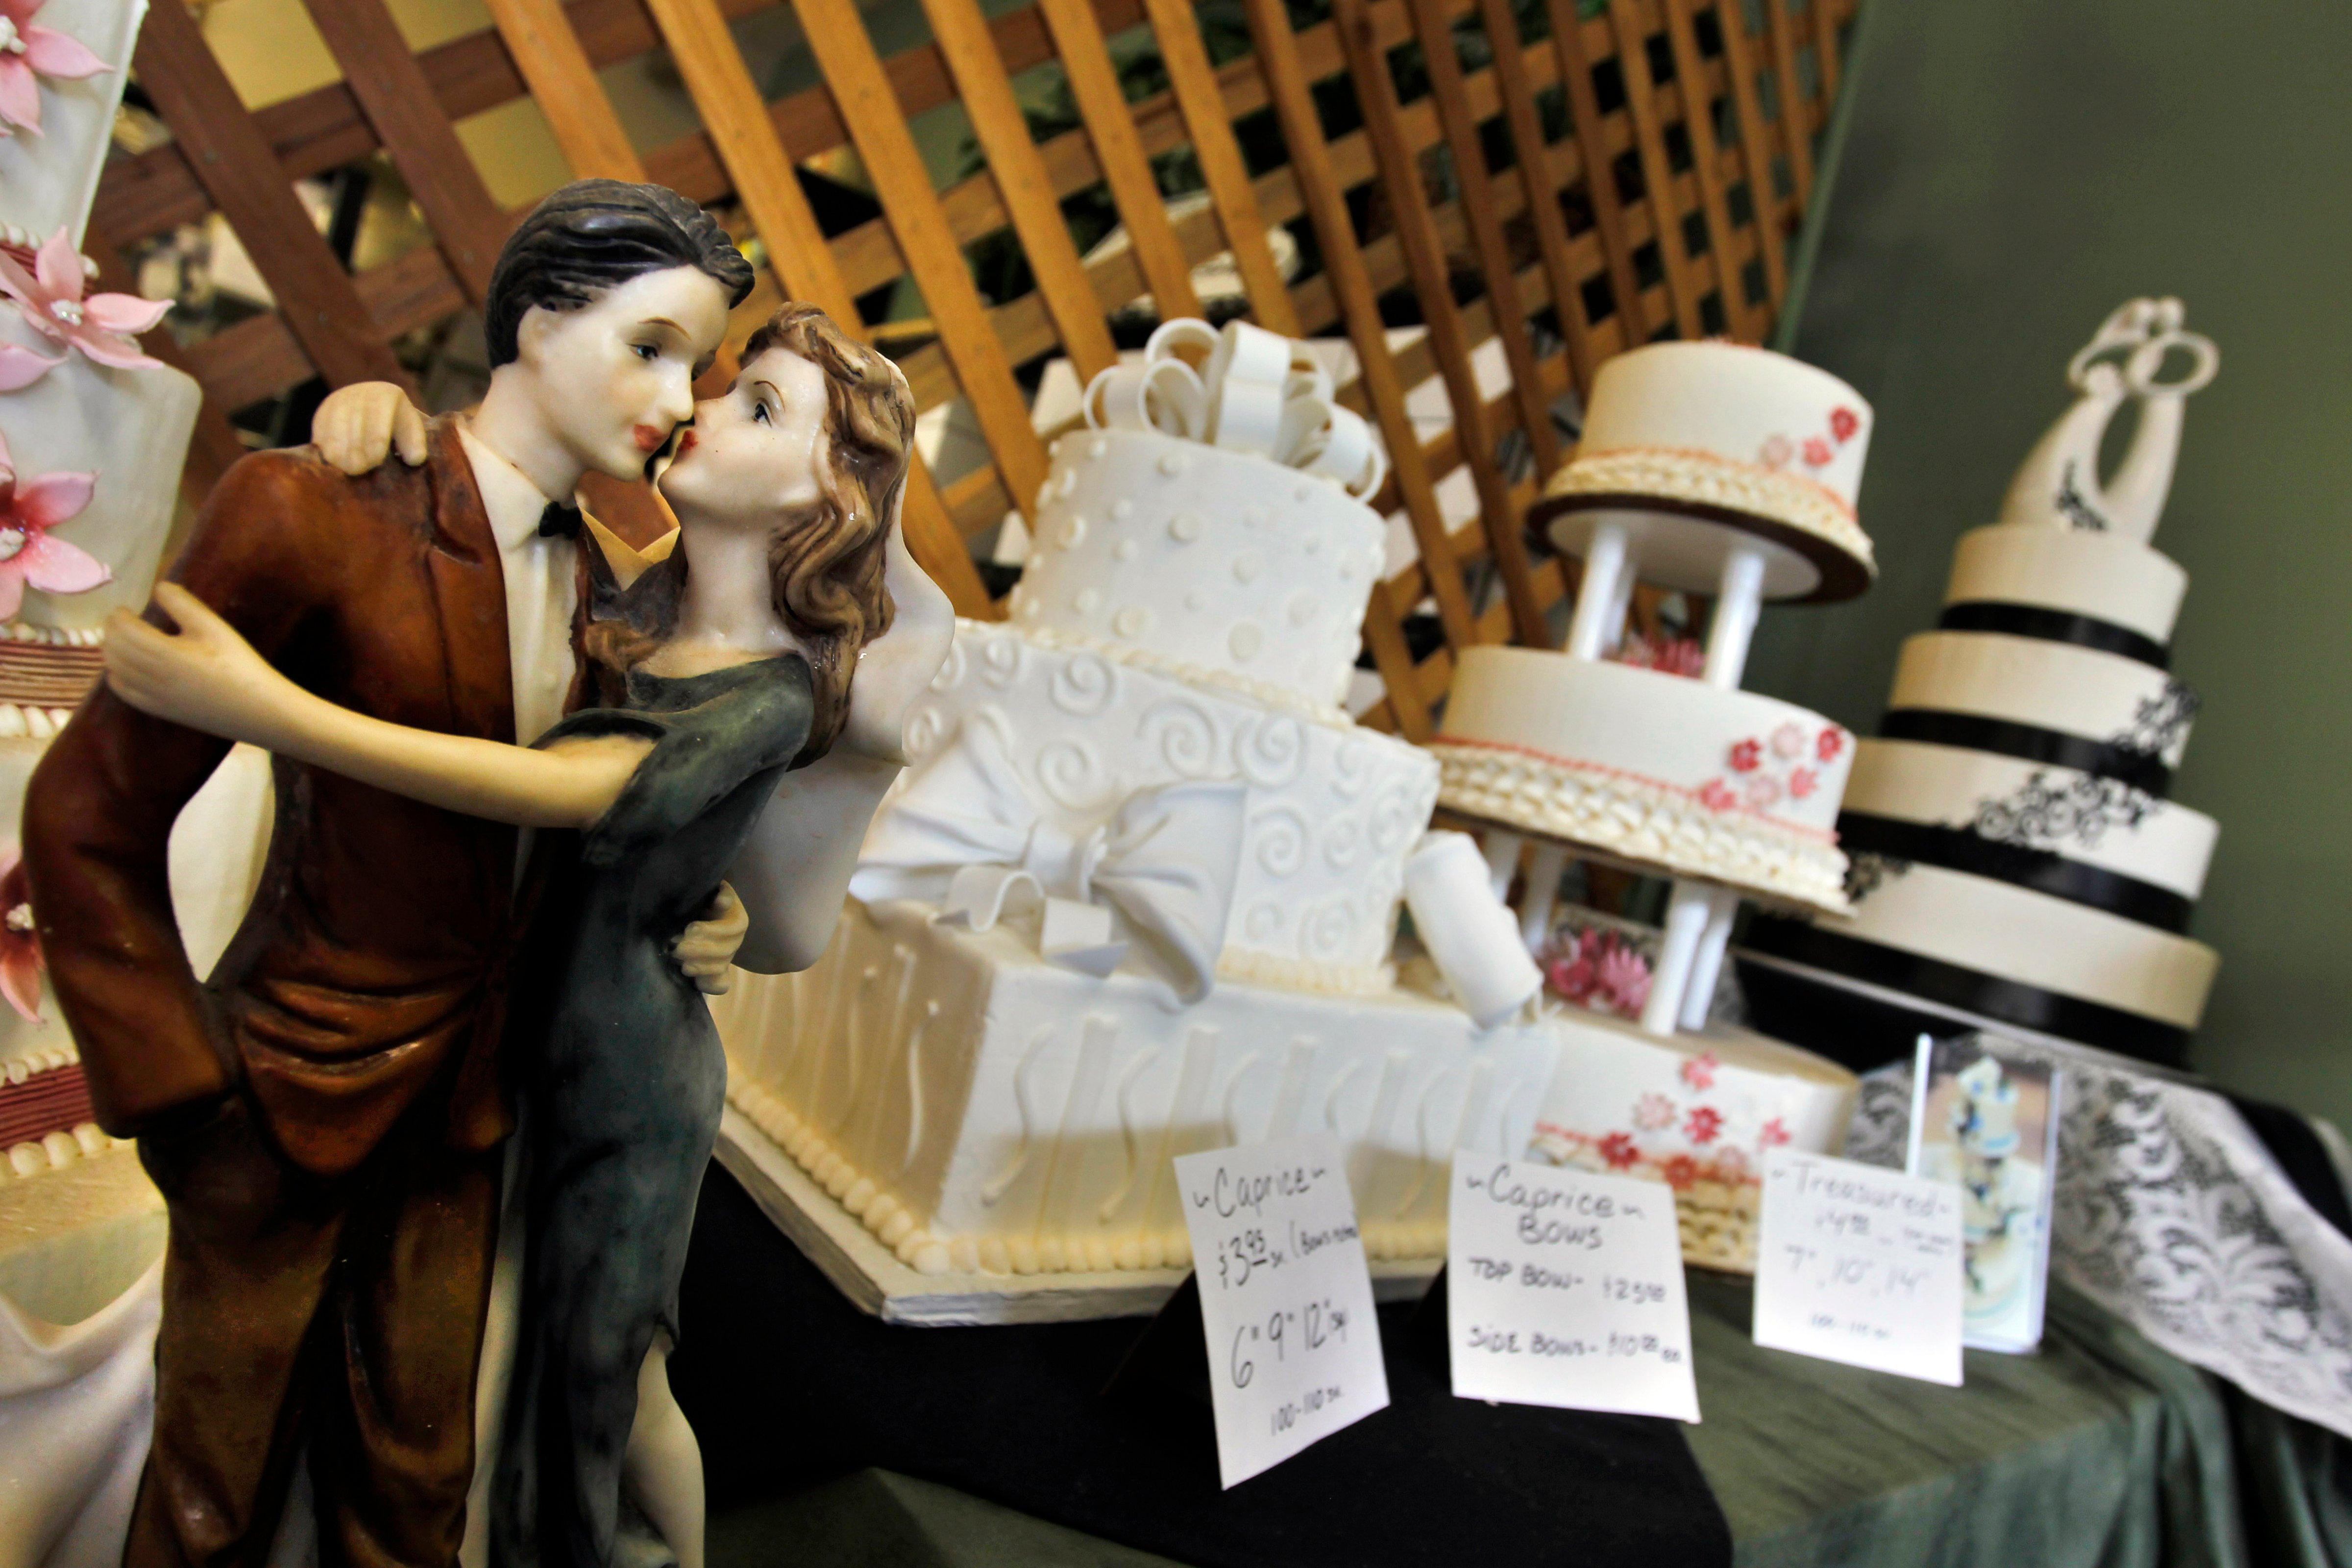 Figurines are depicted in an embrace as part of the wedding cake display at Masterpiece Cakeshop, in Denver on June 6, 2013. (Brennan Linsley&mdash;AP)